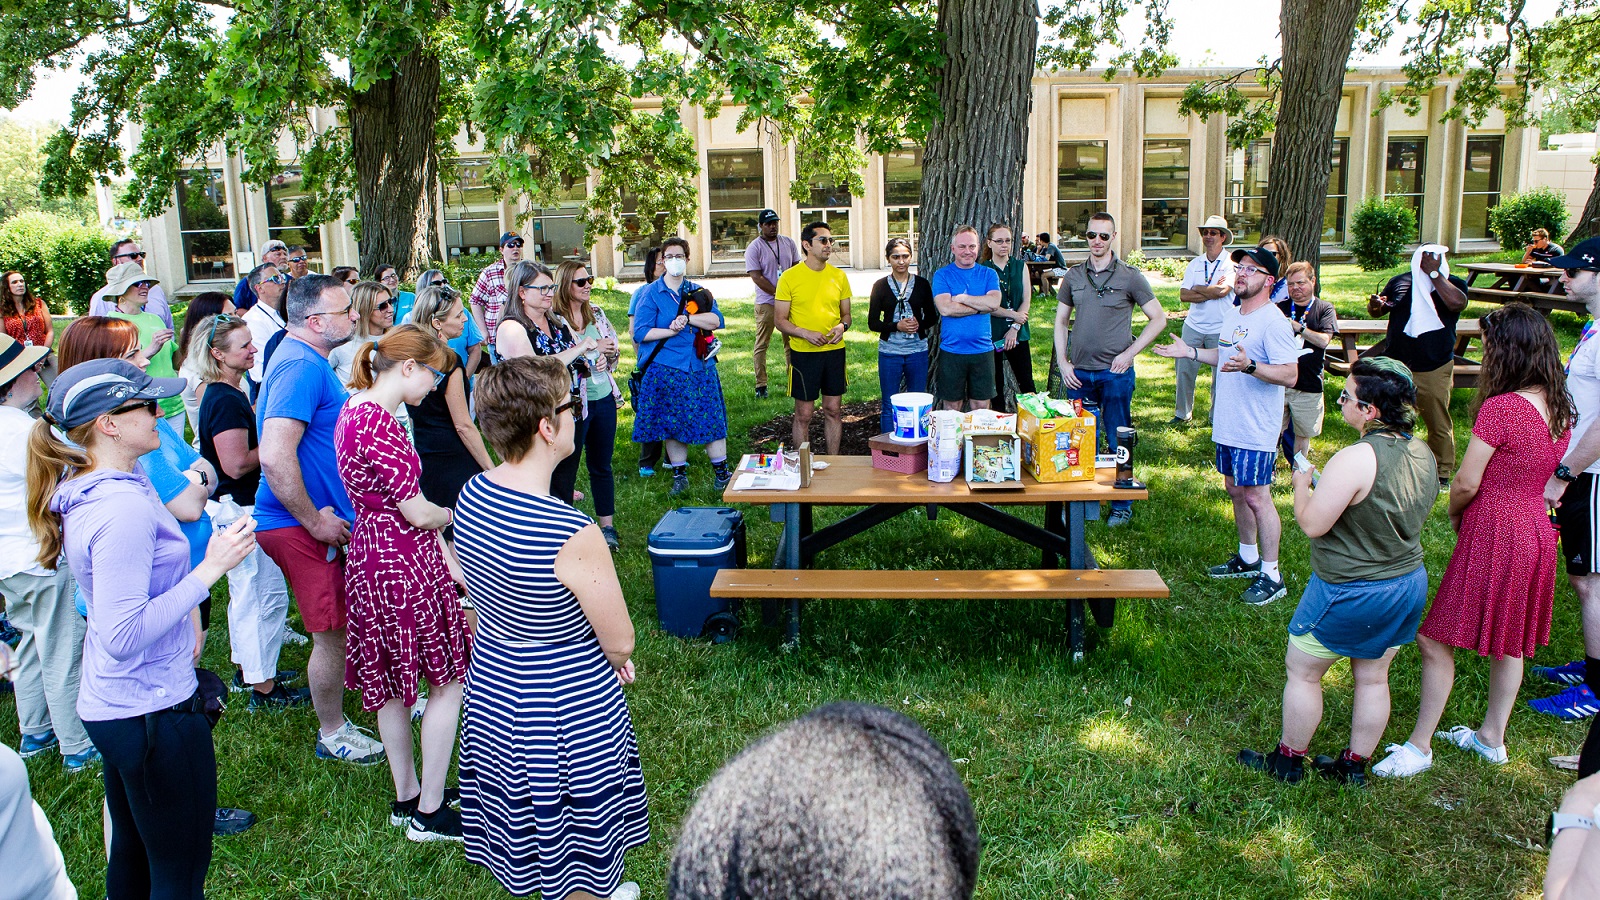 Gathering at a picnic table under trees. (Image by Argonne National Laboratory.)